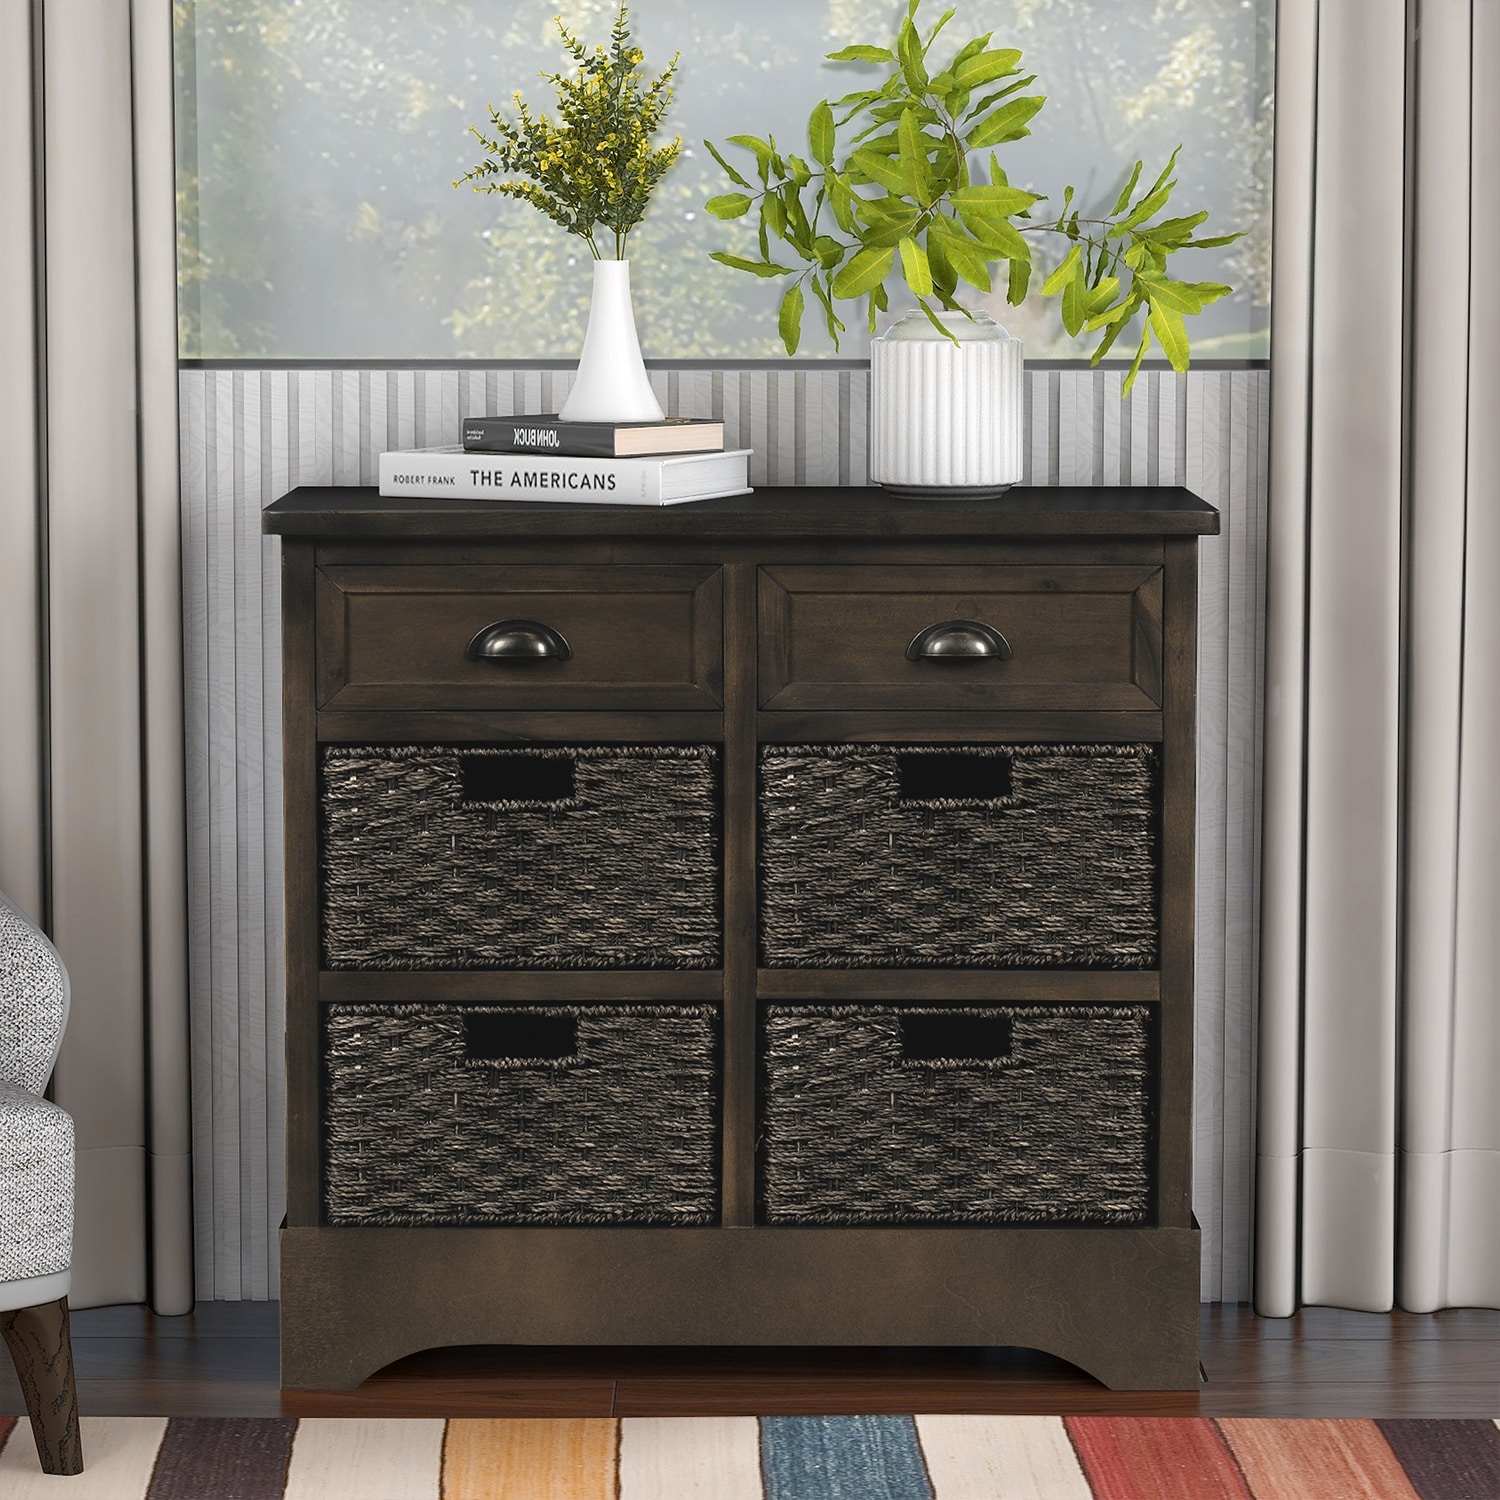 https://ak1.ostkcdn.com/images/products/is/images/direct/5d03bdc4c32b54e0b9ed4b7967439c6ca9bcc5fa/Rustic-Storage-Cabinet-with-Two-Drawers-and-Four-Classic-Rattan-Basket.jpg